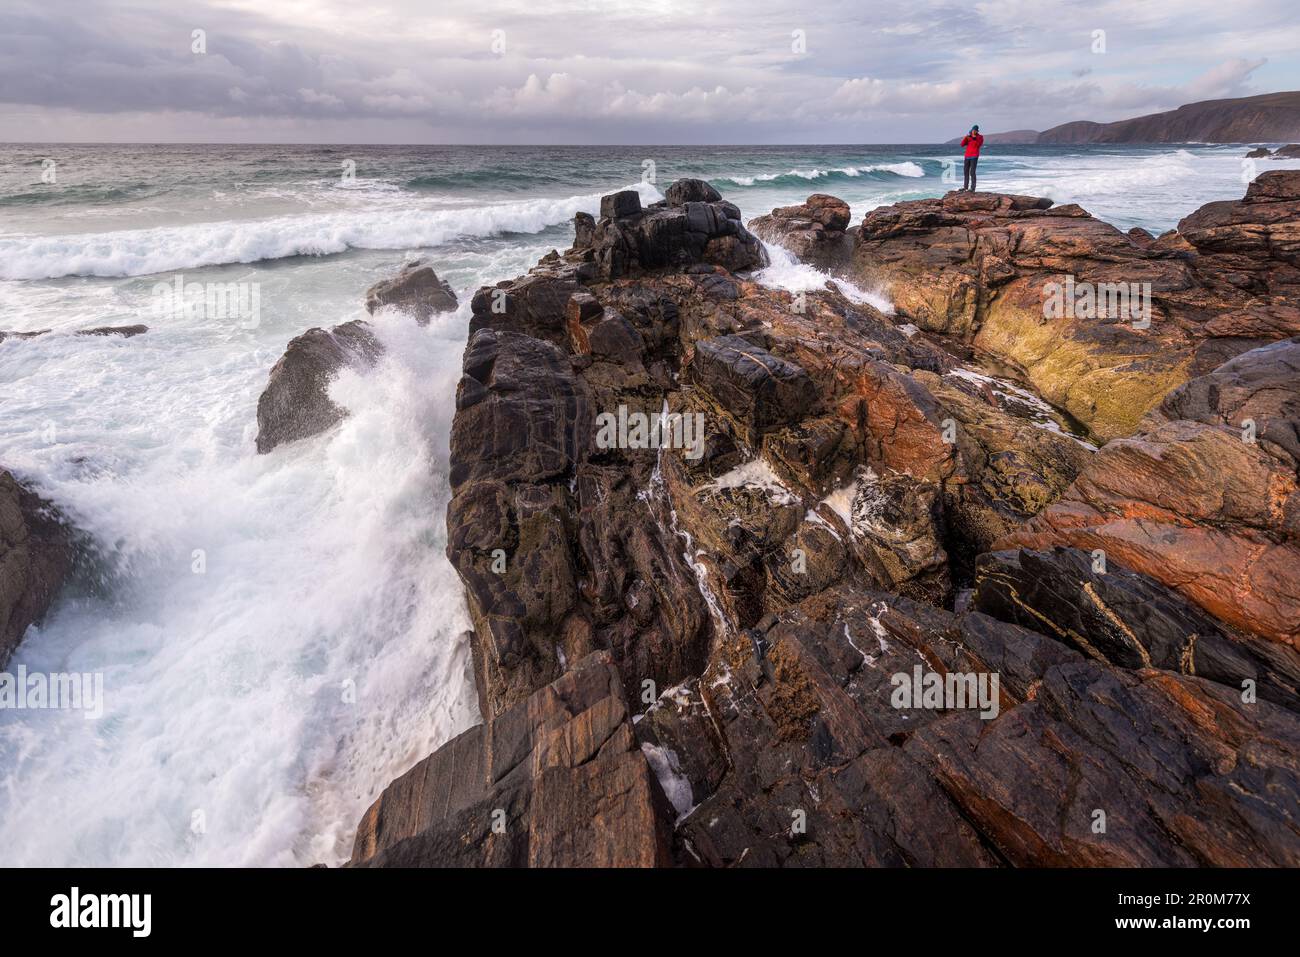 A man stands on a rock in front of the surf at Sandwood Bay, Highlands, Scotland, UK Stock Photo